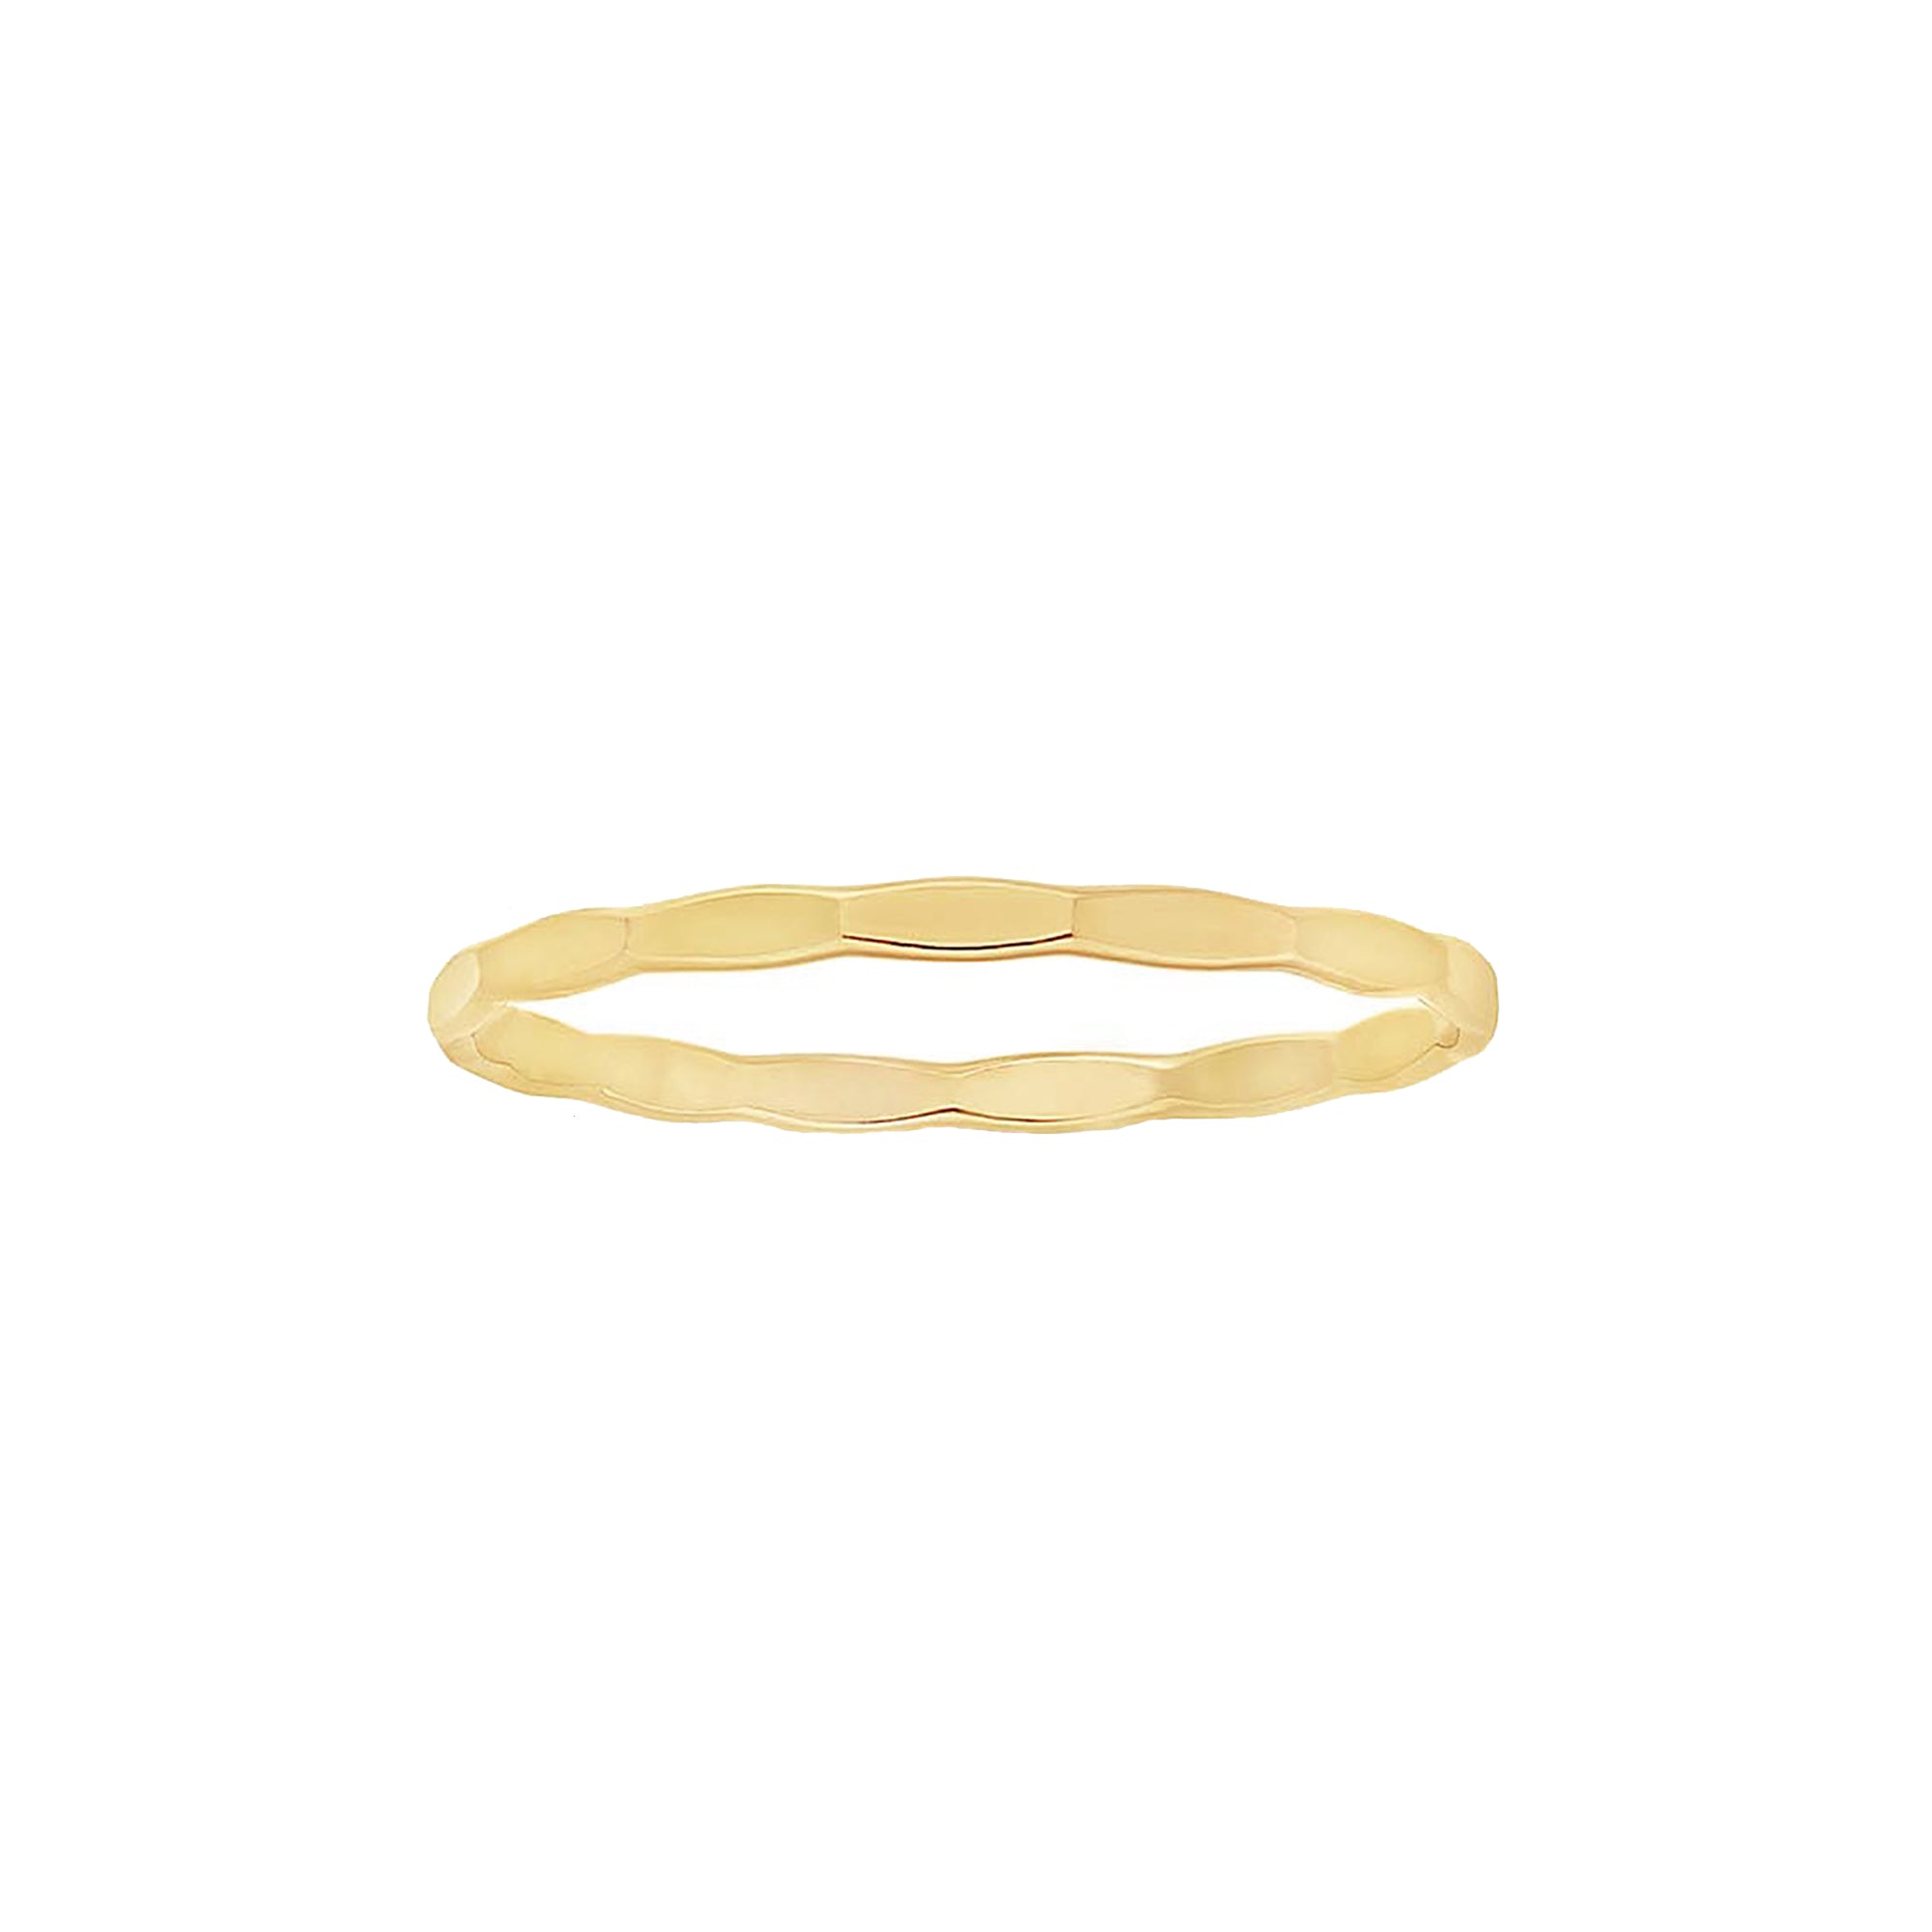 Hammered Stacking Ring - Rings - MOD + JO